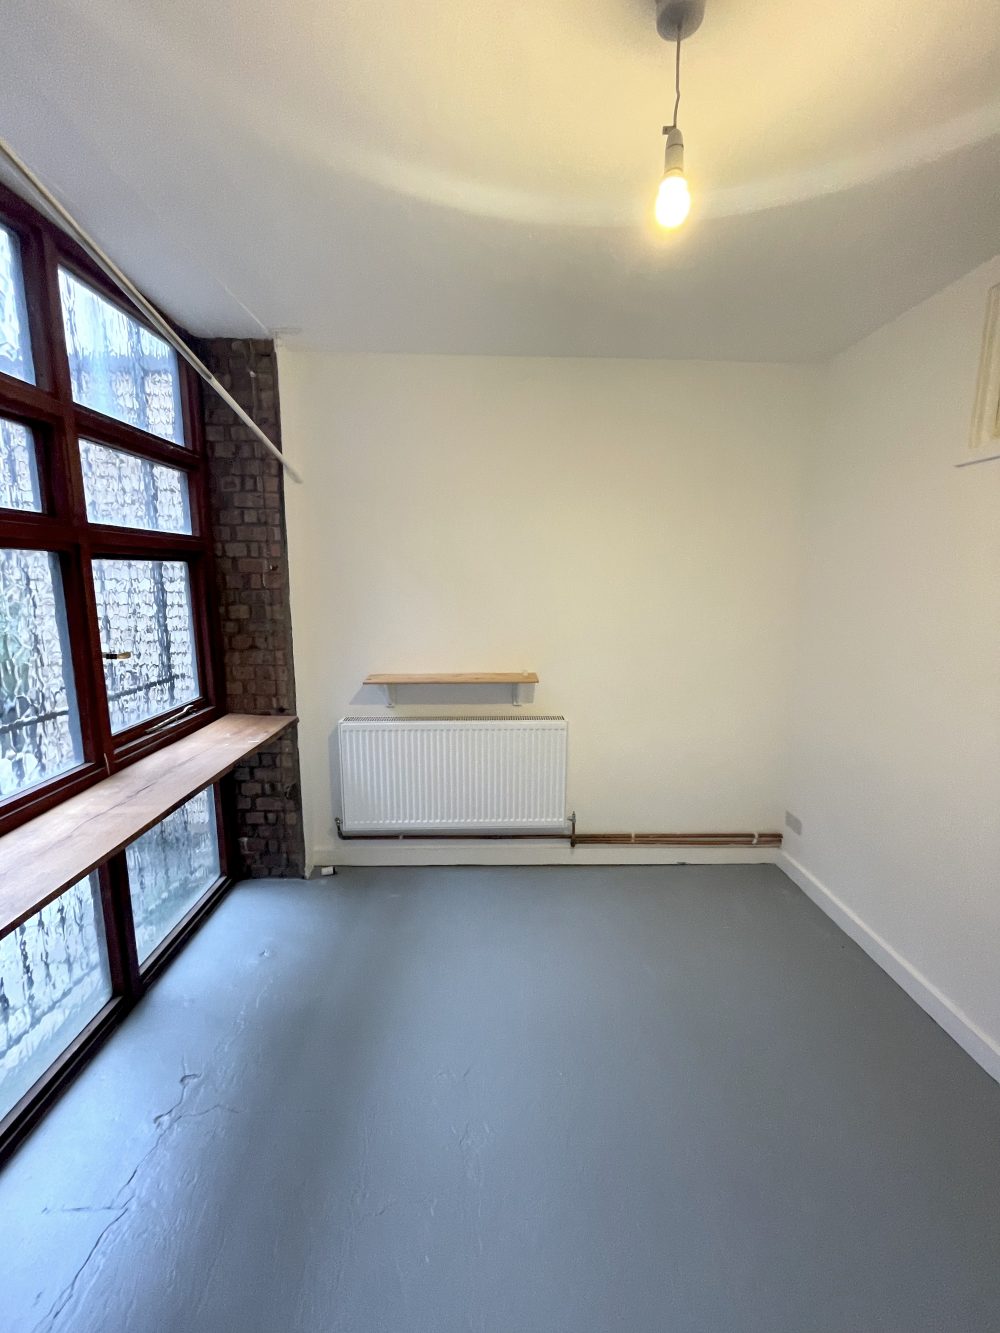 2 Bedroom Flat Available to rent in E9 London Fields Enterprise House Pic27